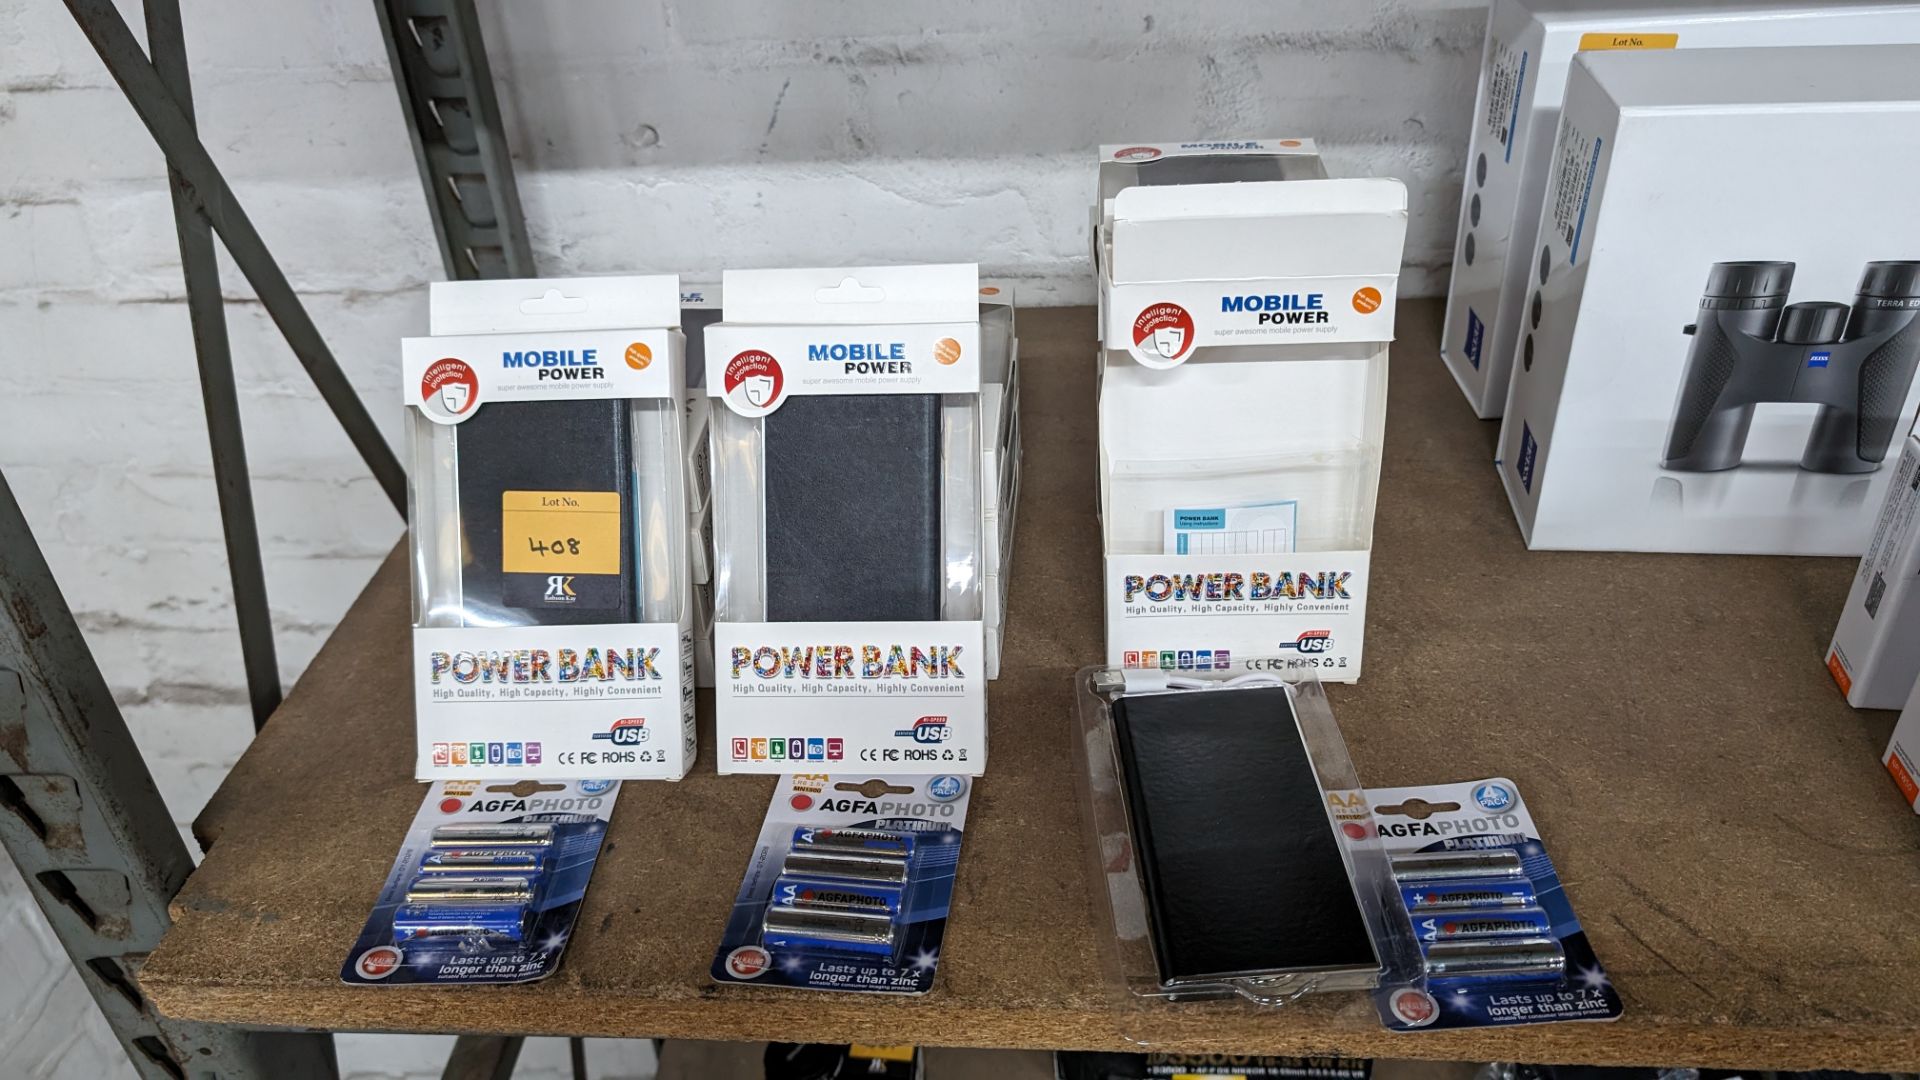 17 off mobile power banks plus 3 packs of batteries - Image 4 of 10